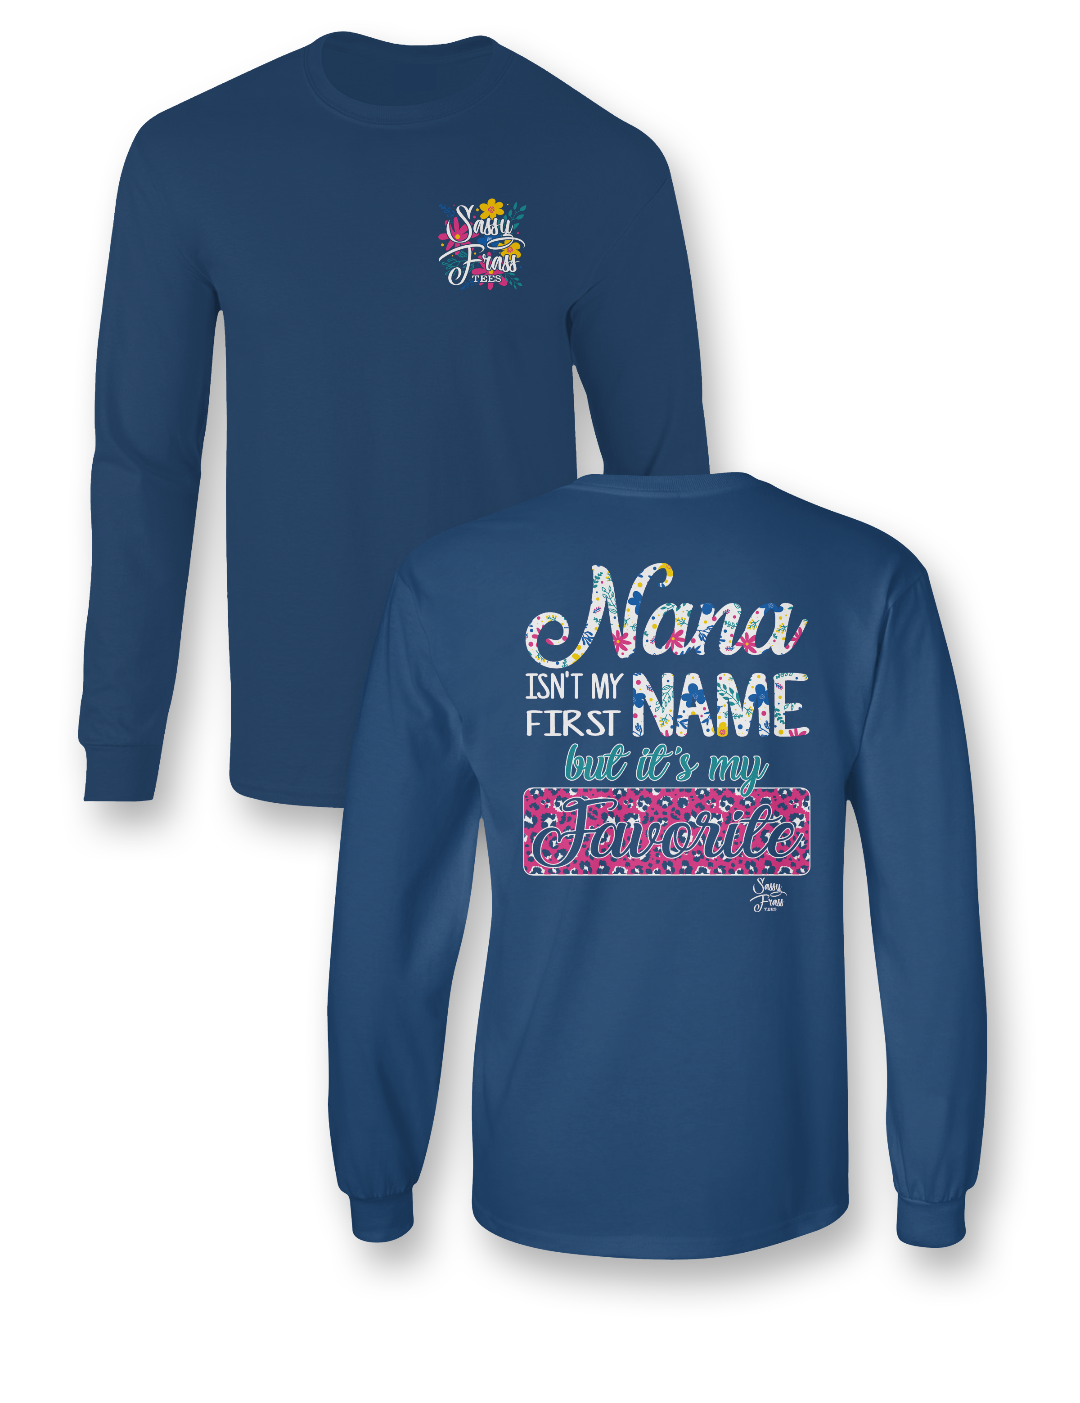 SALE Sassy Frass Nana Isn't my First Name but it's my Favorite Long Sleeve Bright Girlie T Shirt